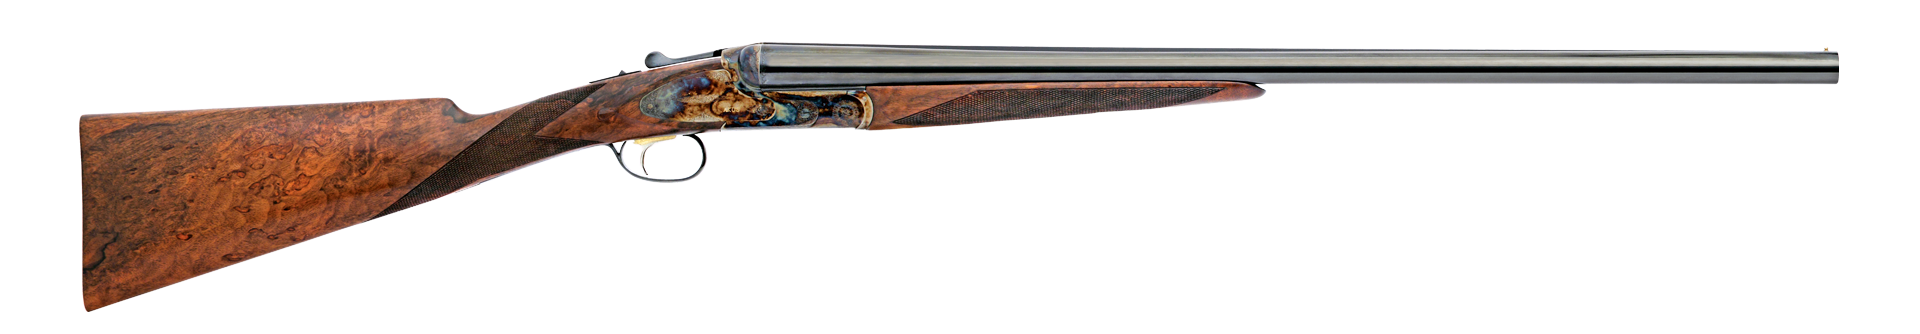 AKUS build shotguns that fall between $2,000 and $5,000. That's a reasonable price range for a side-by-side.